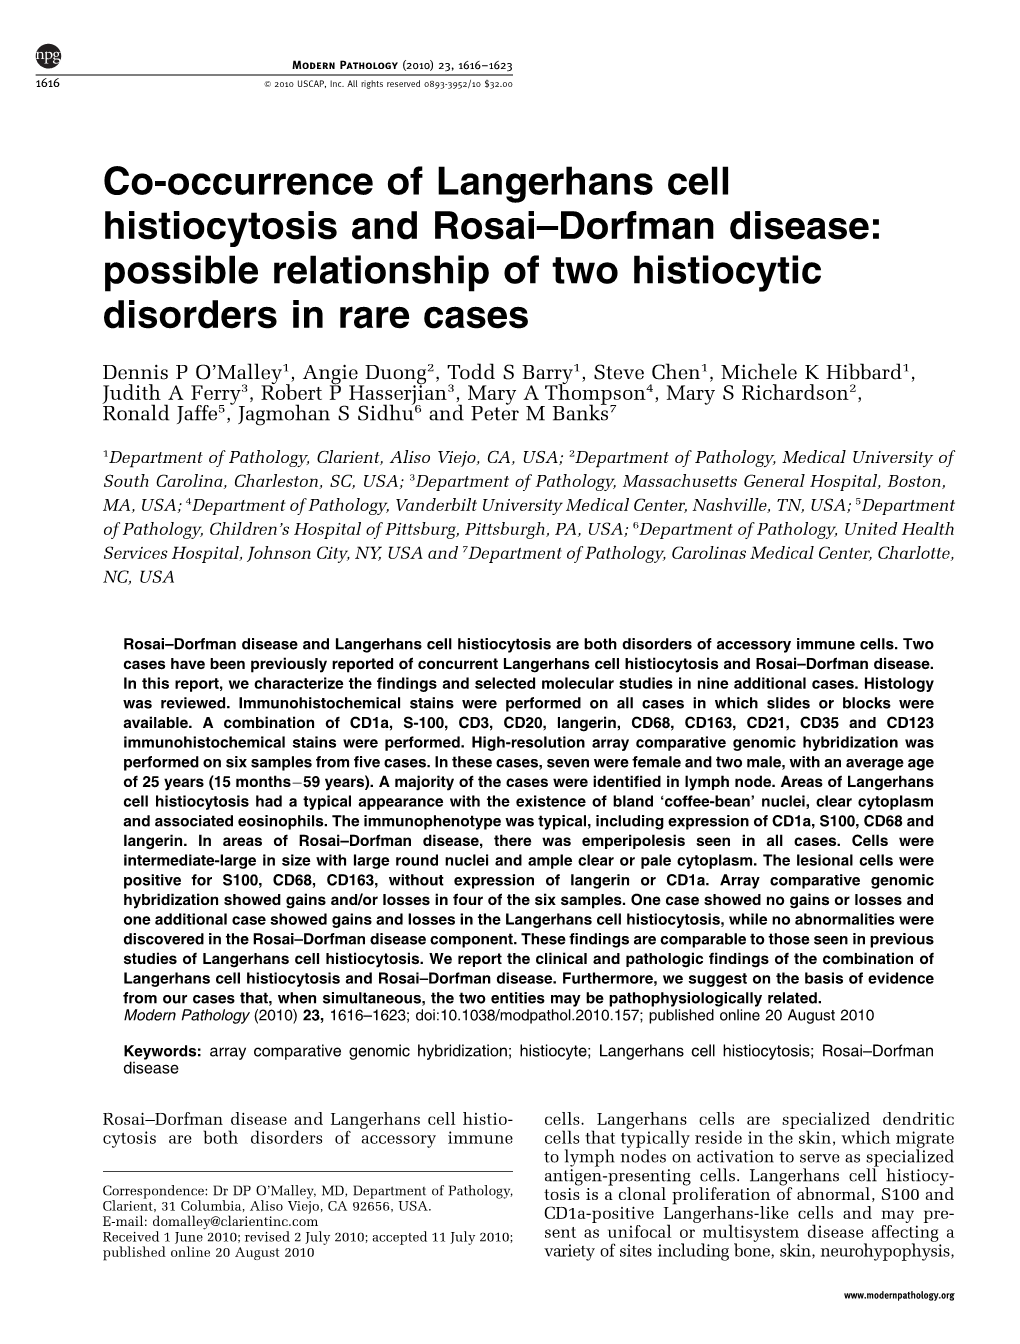 Co-Occurrence of Langerhans Cell Histiocytosis and Rosai&Ndash